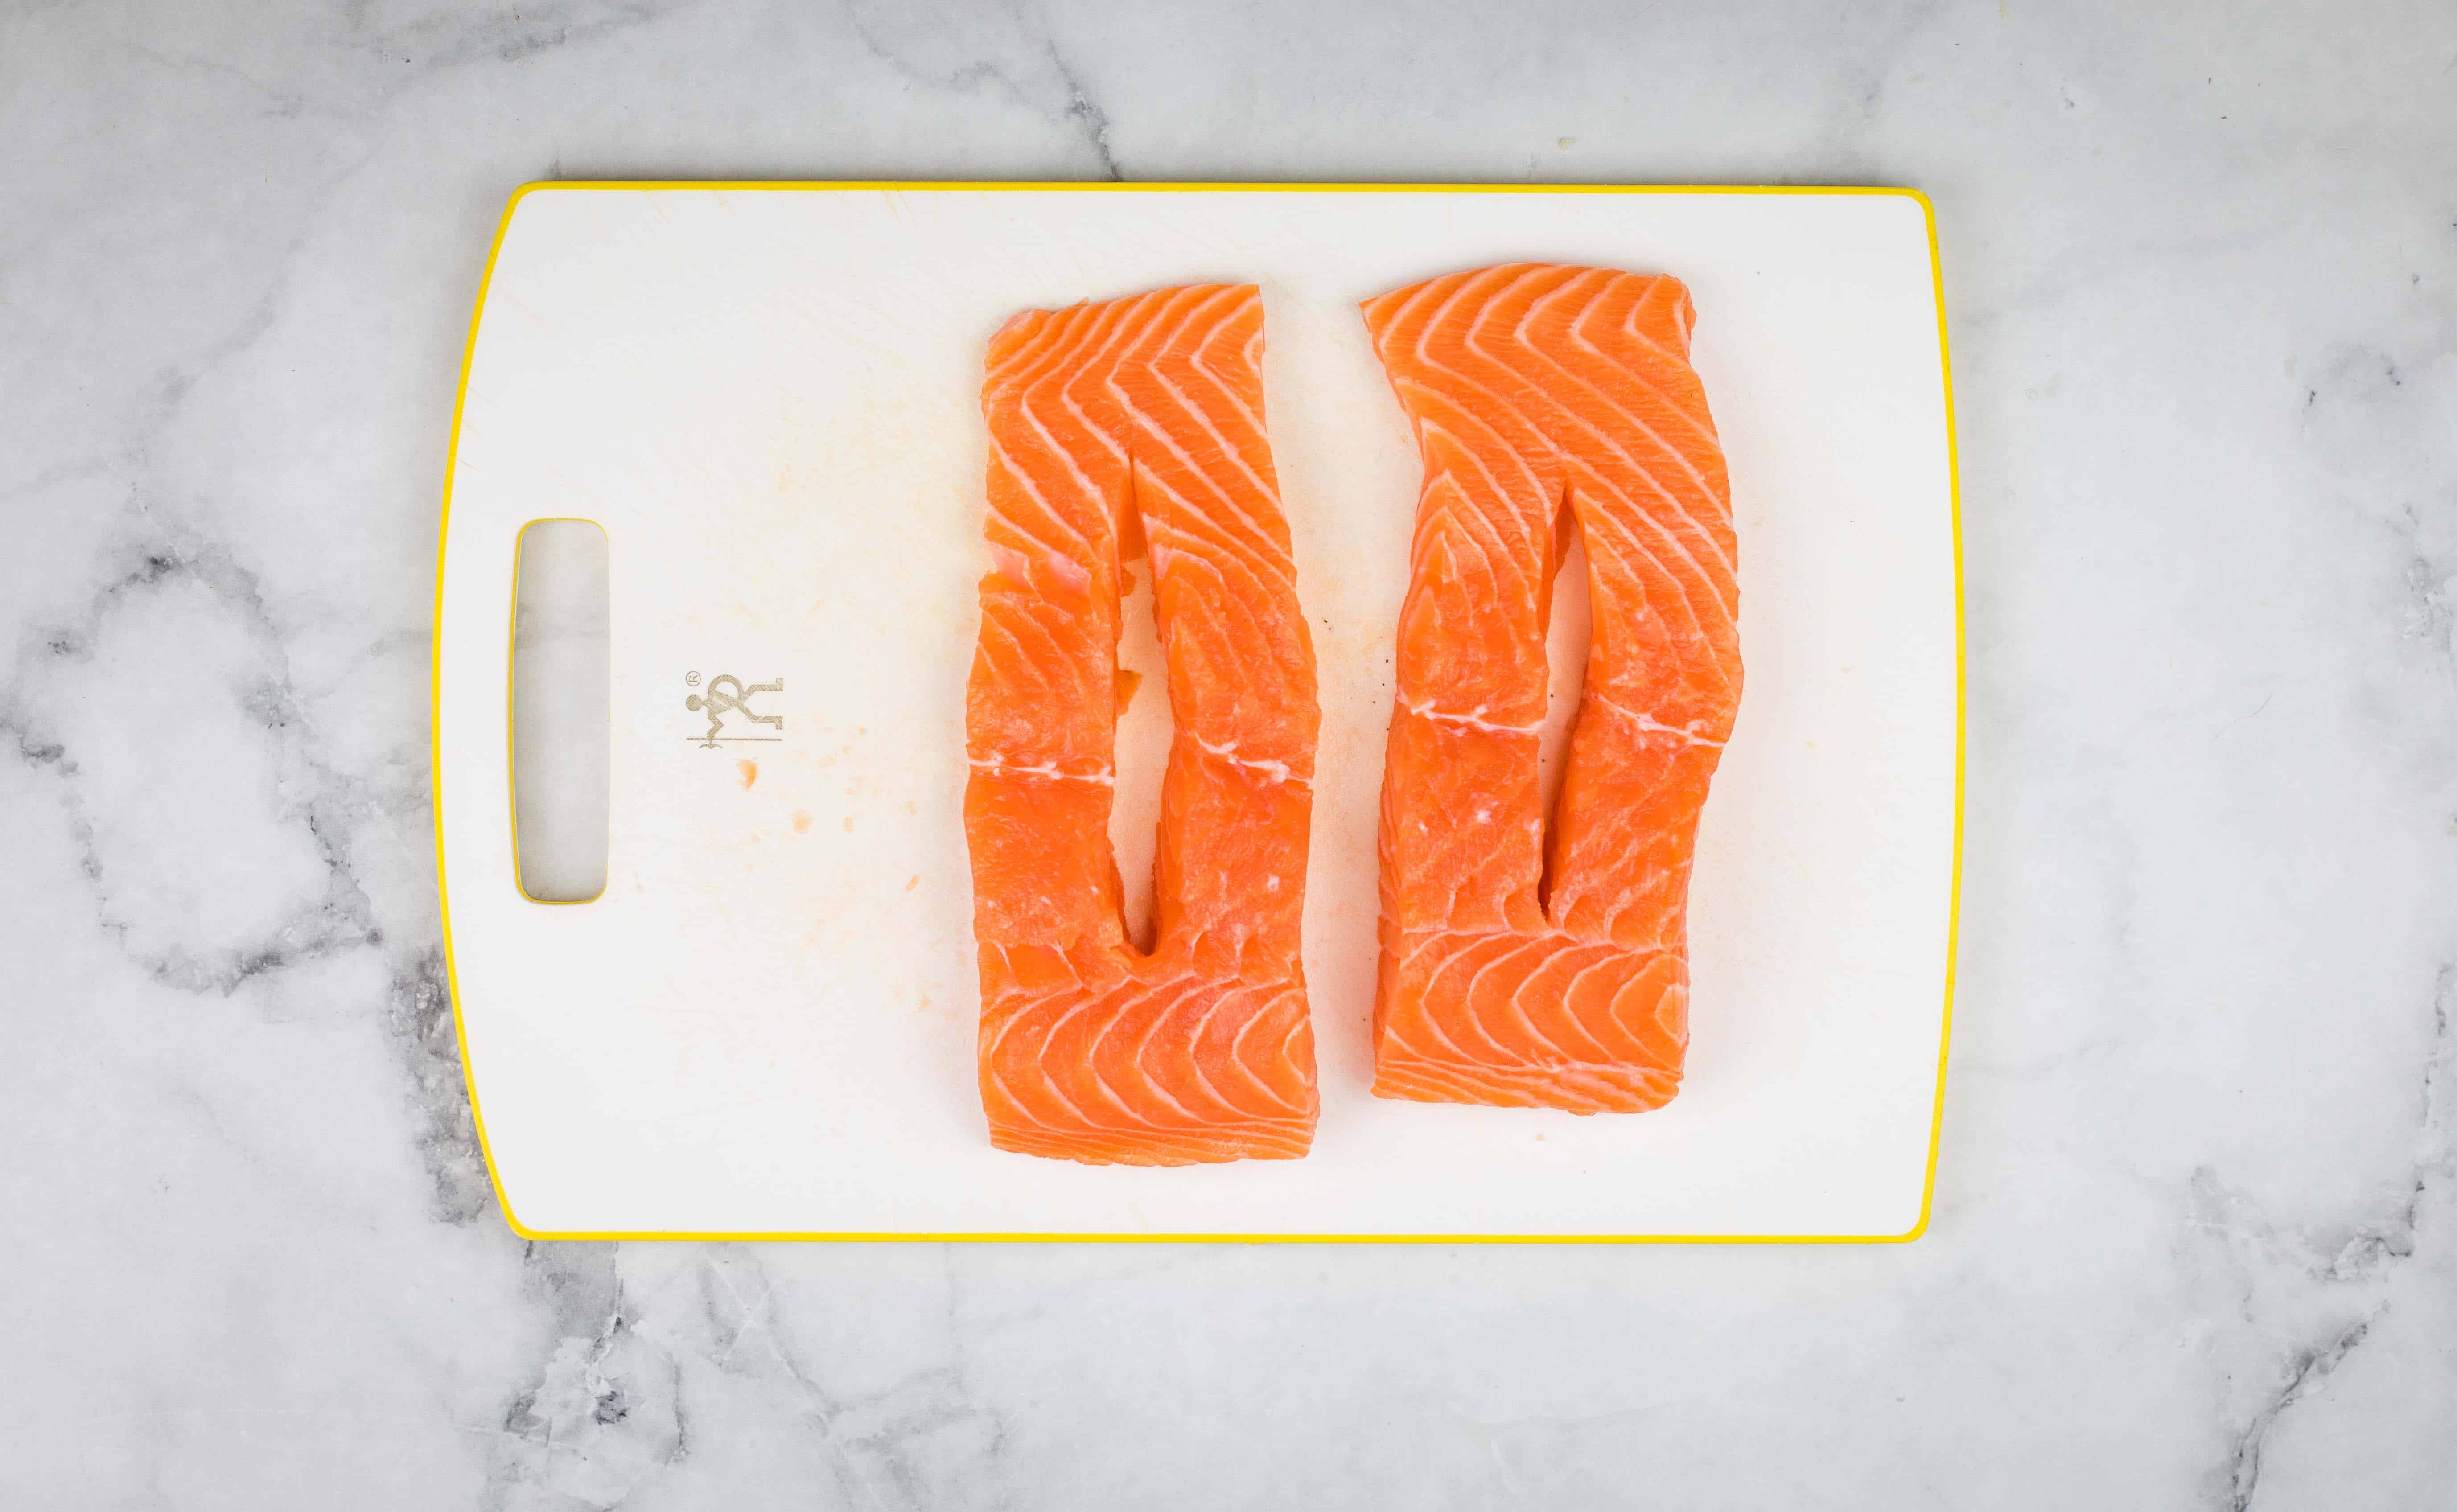 cut a lengthwise slit in the salmon to make seafood stuffed salmon